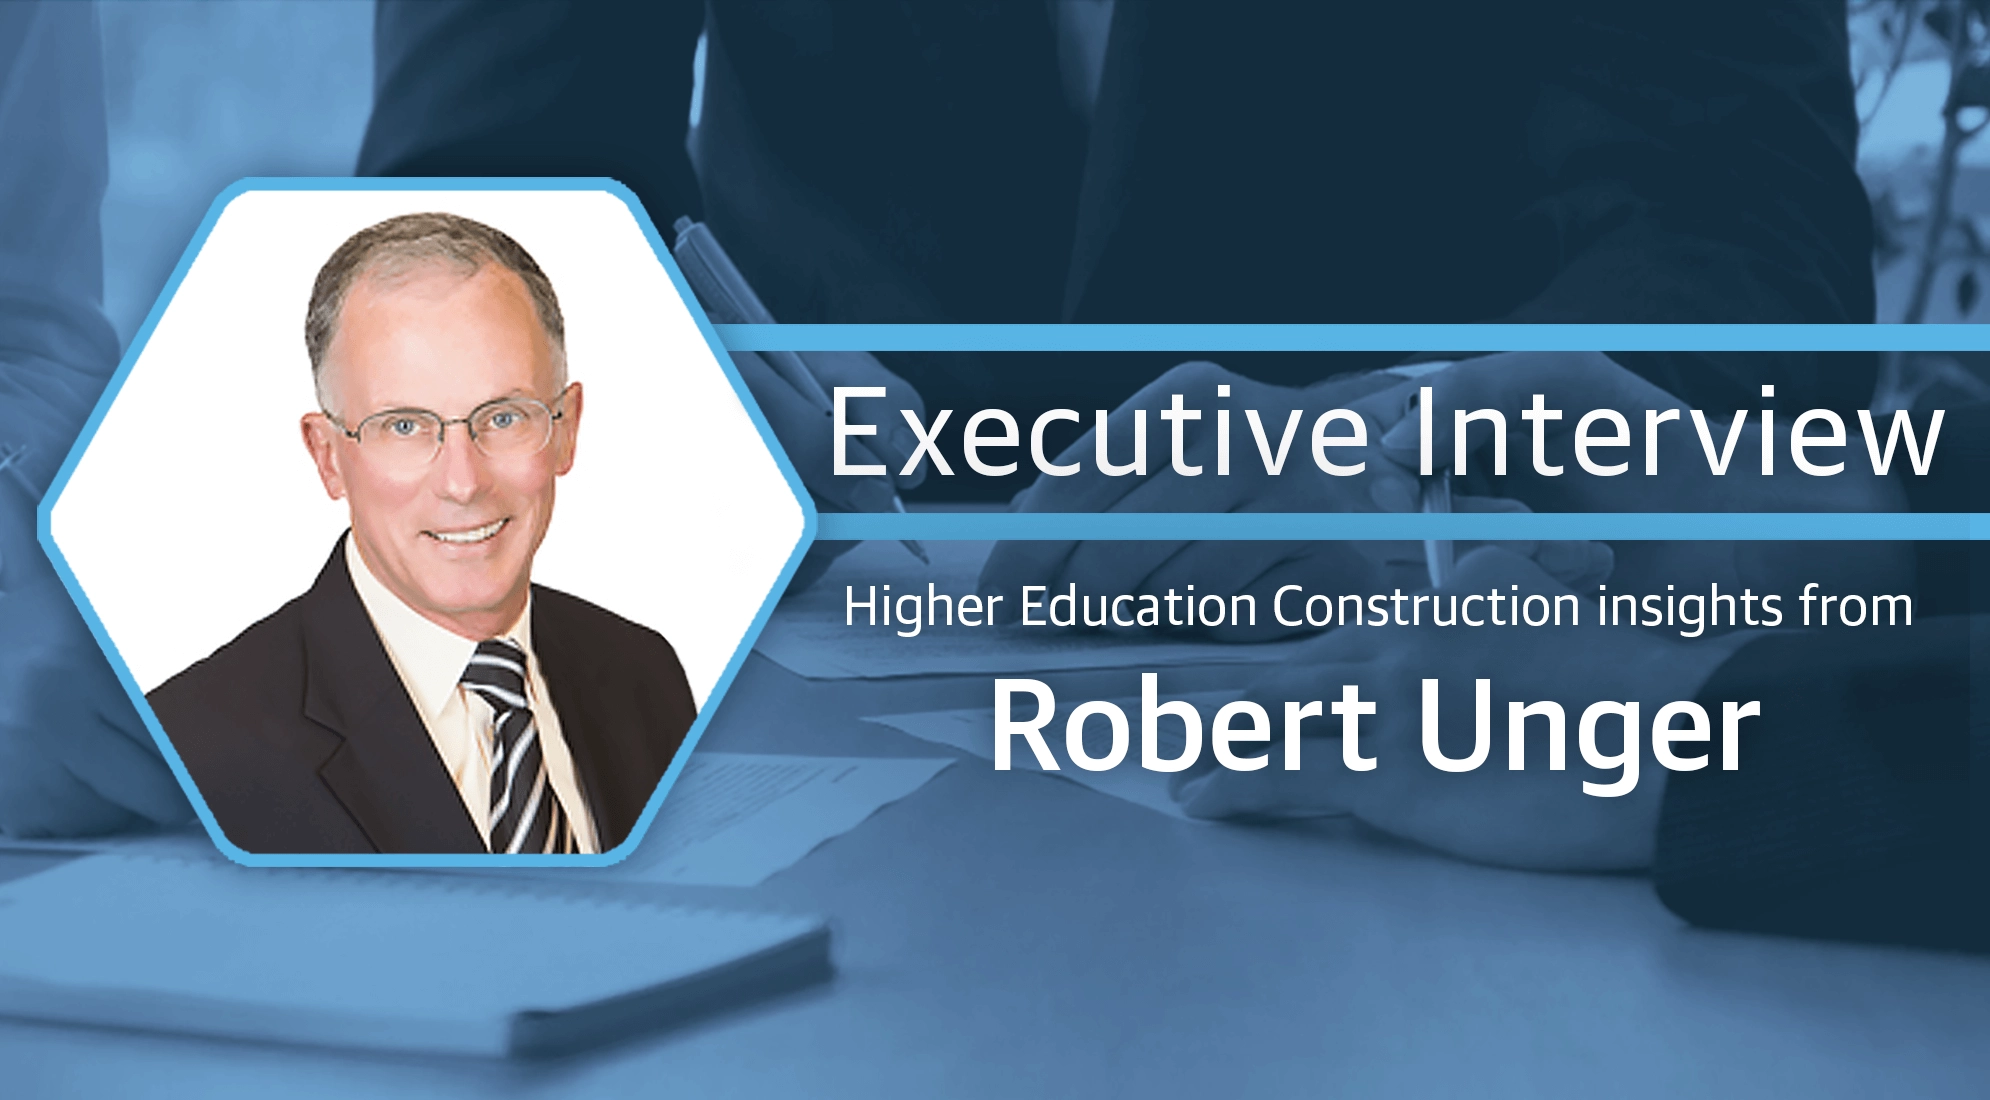 Higher Ed Construction Insights from Robert Unger